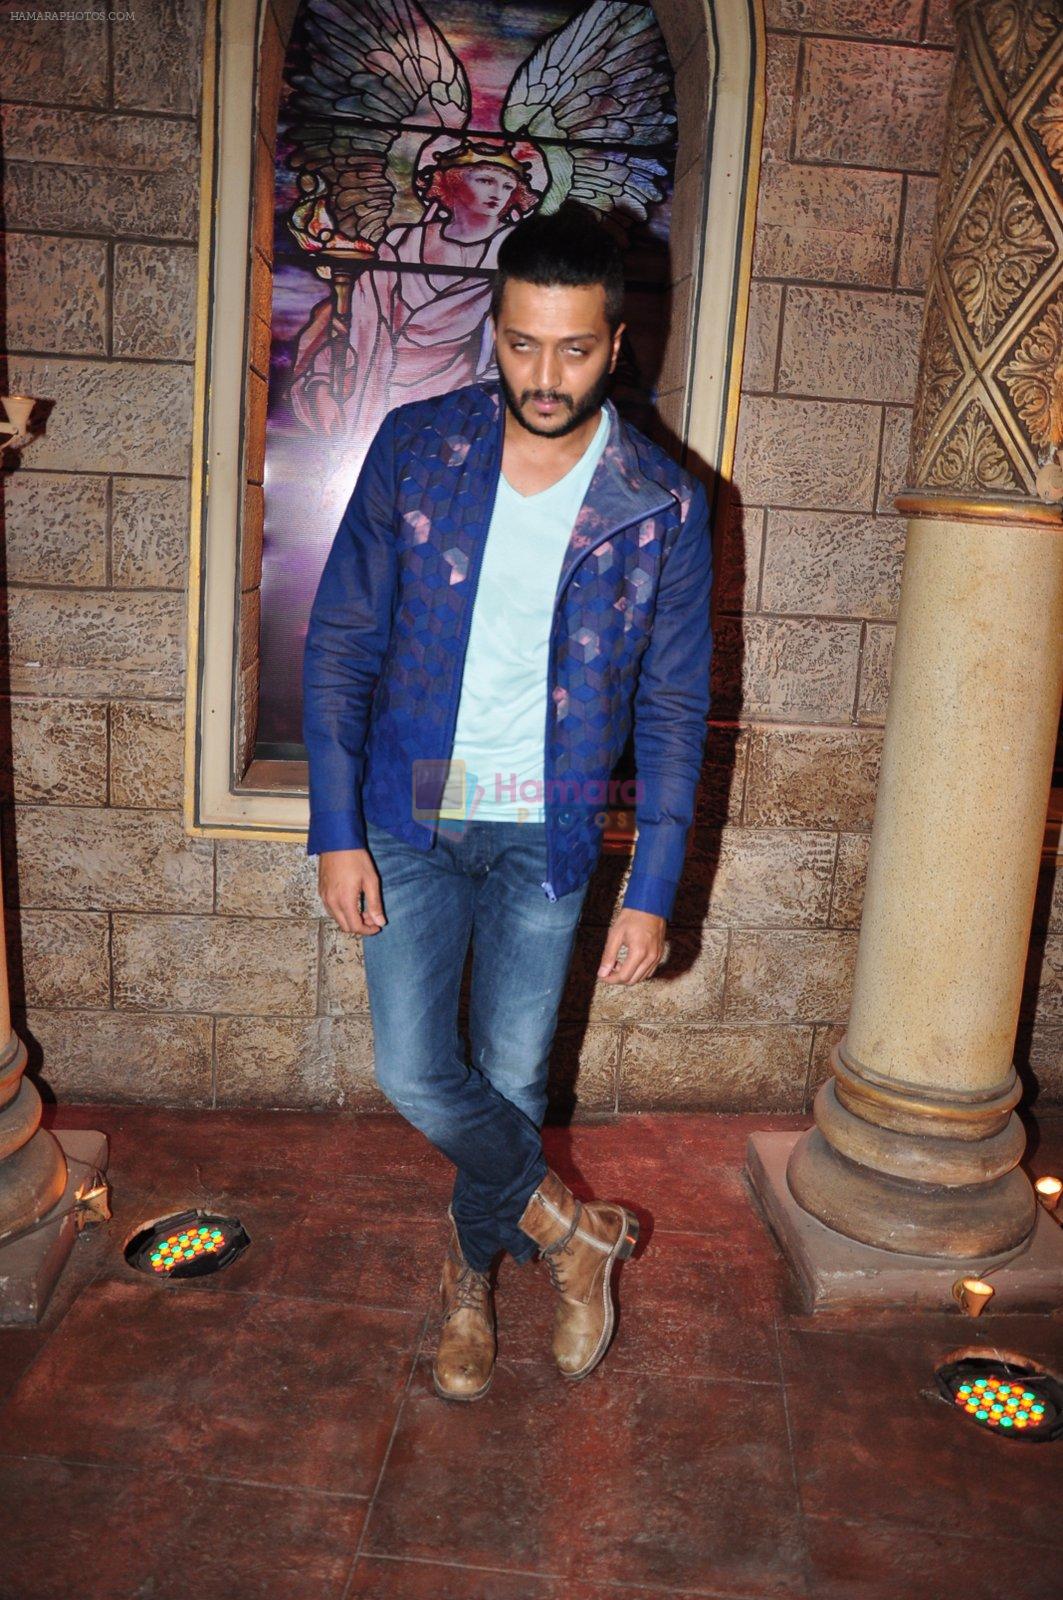 Riteish Deshmukh at Housefull 3 promotions on Comedy Nights Bachao on 23rd May 2016